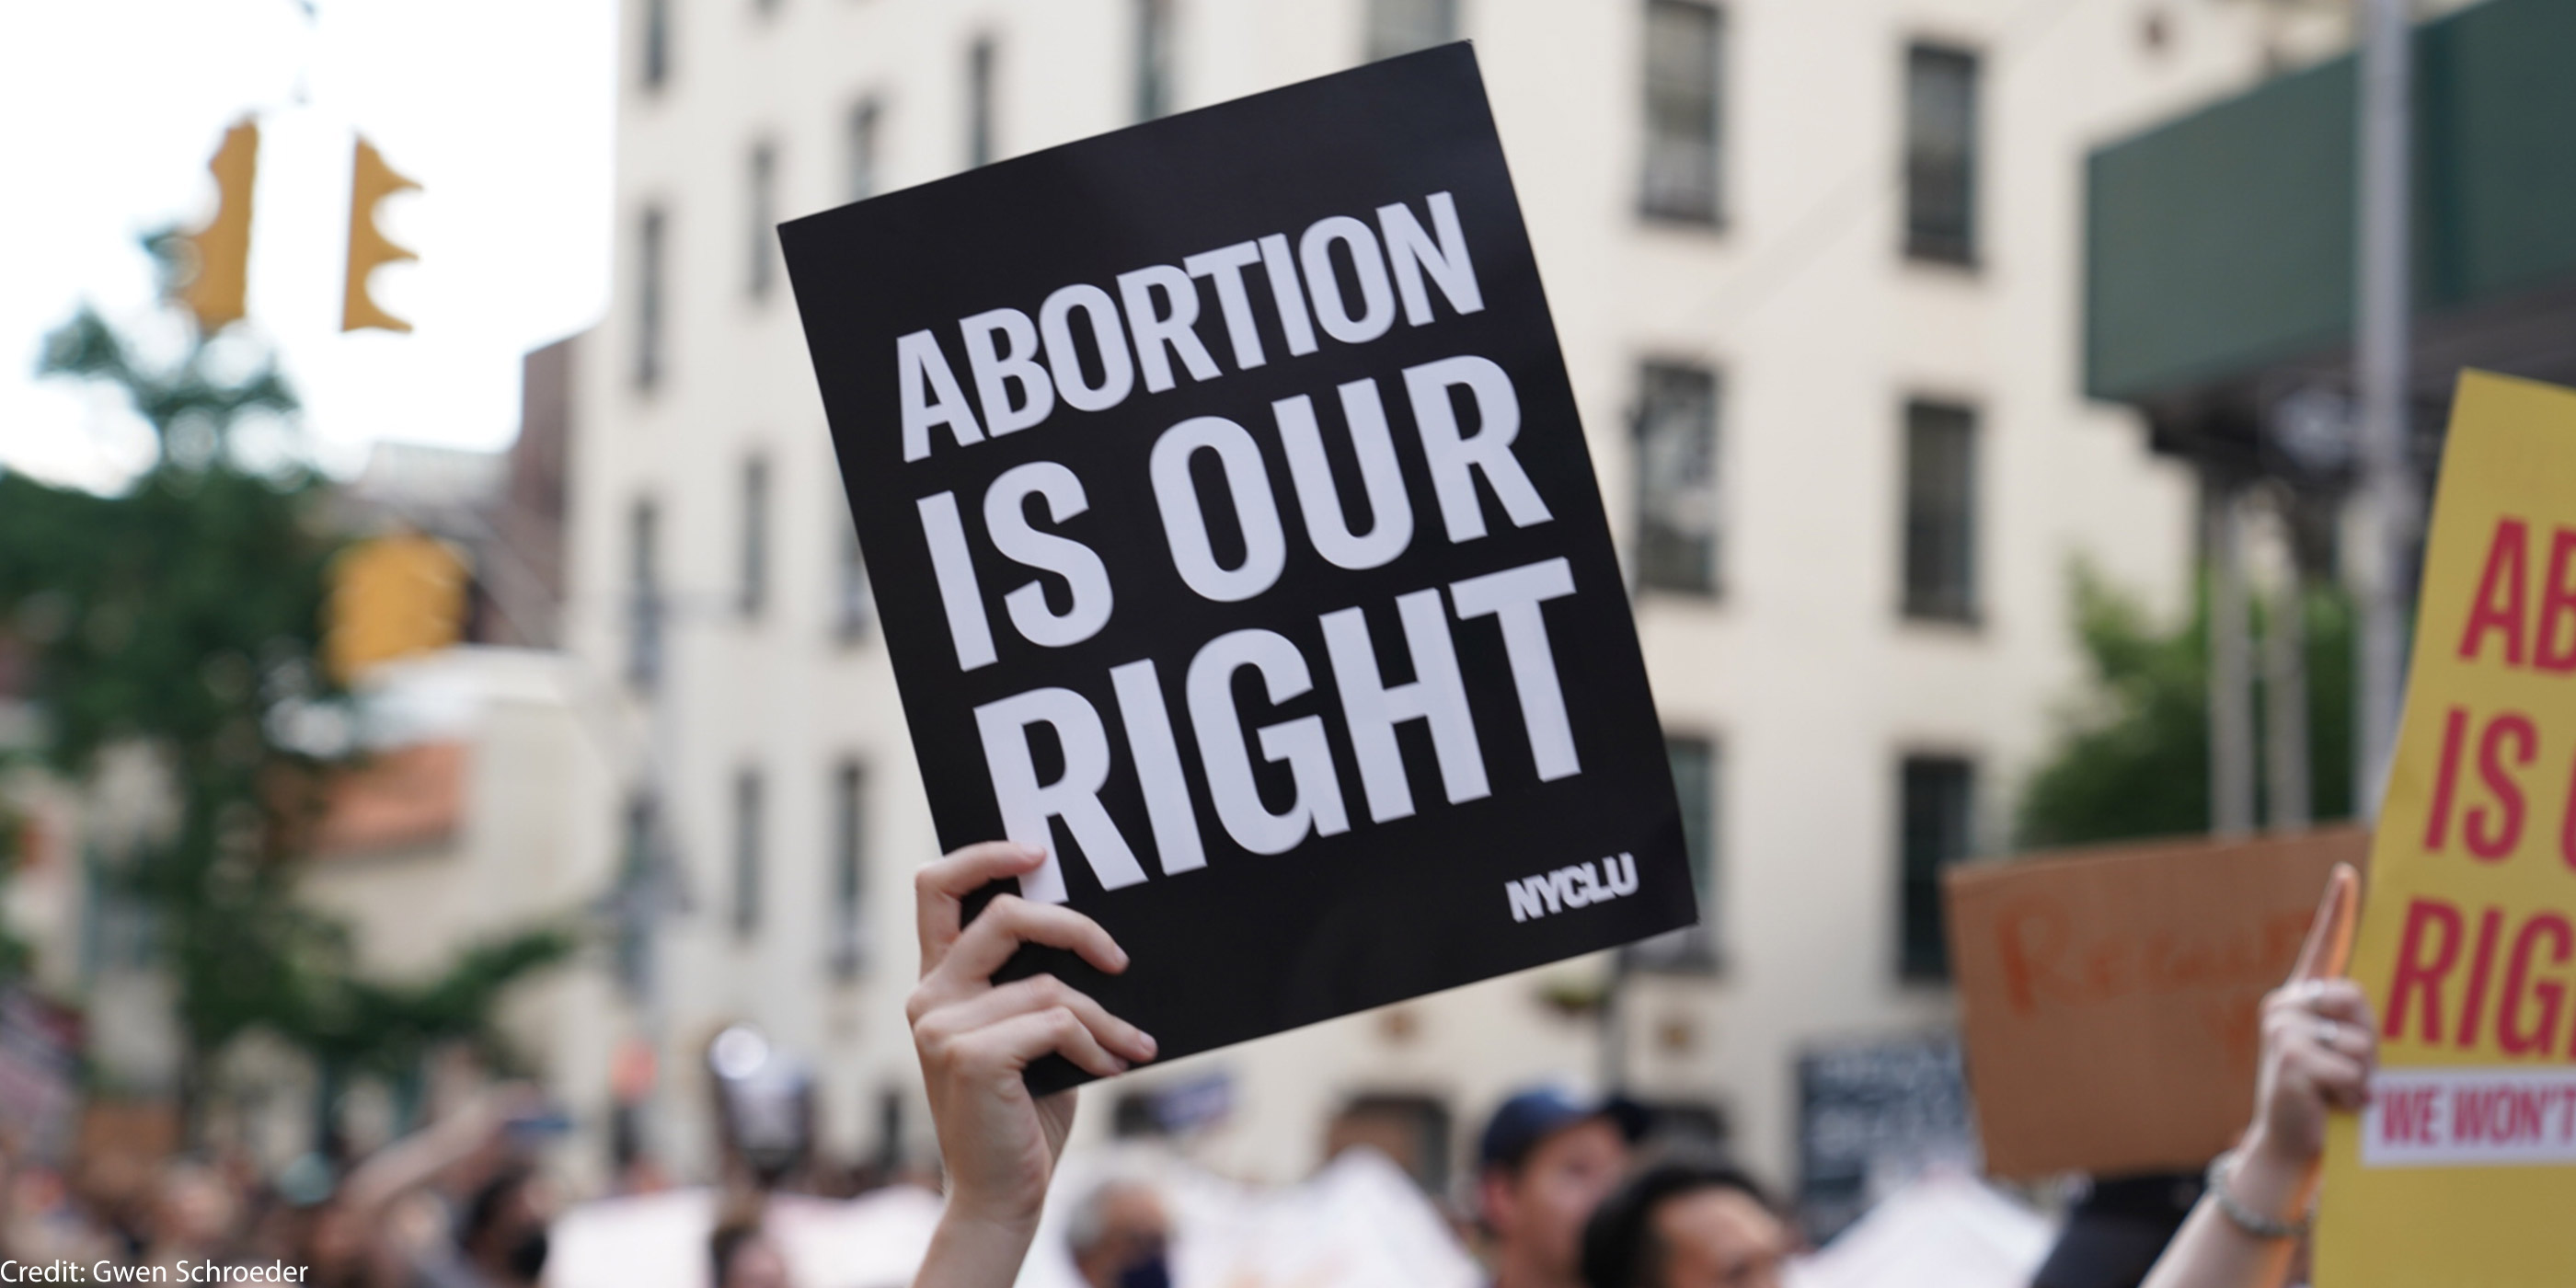 A person holding up a sign saying "Abortion is Our Right."